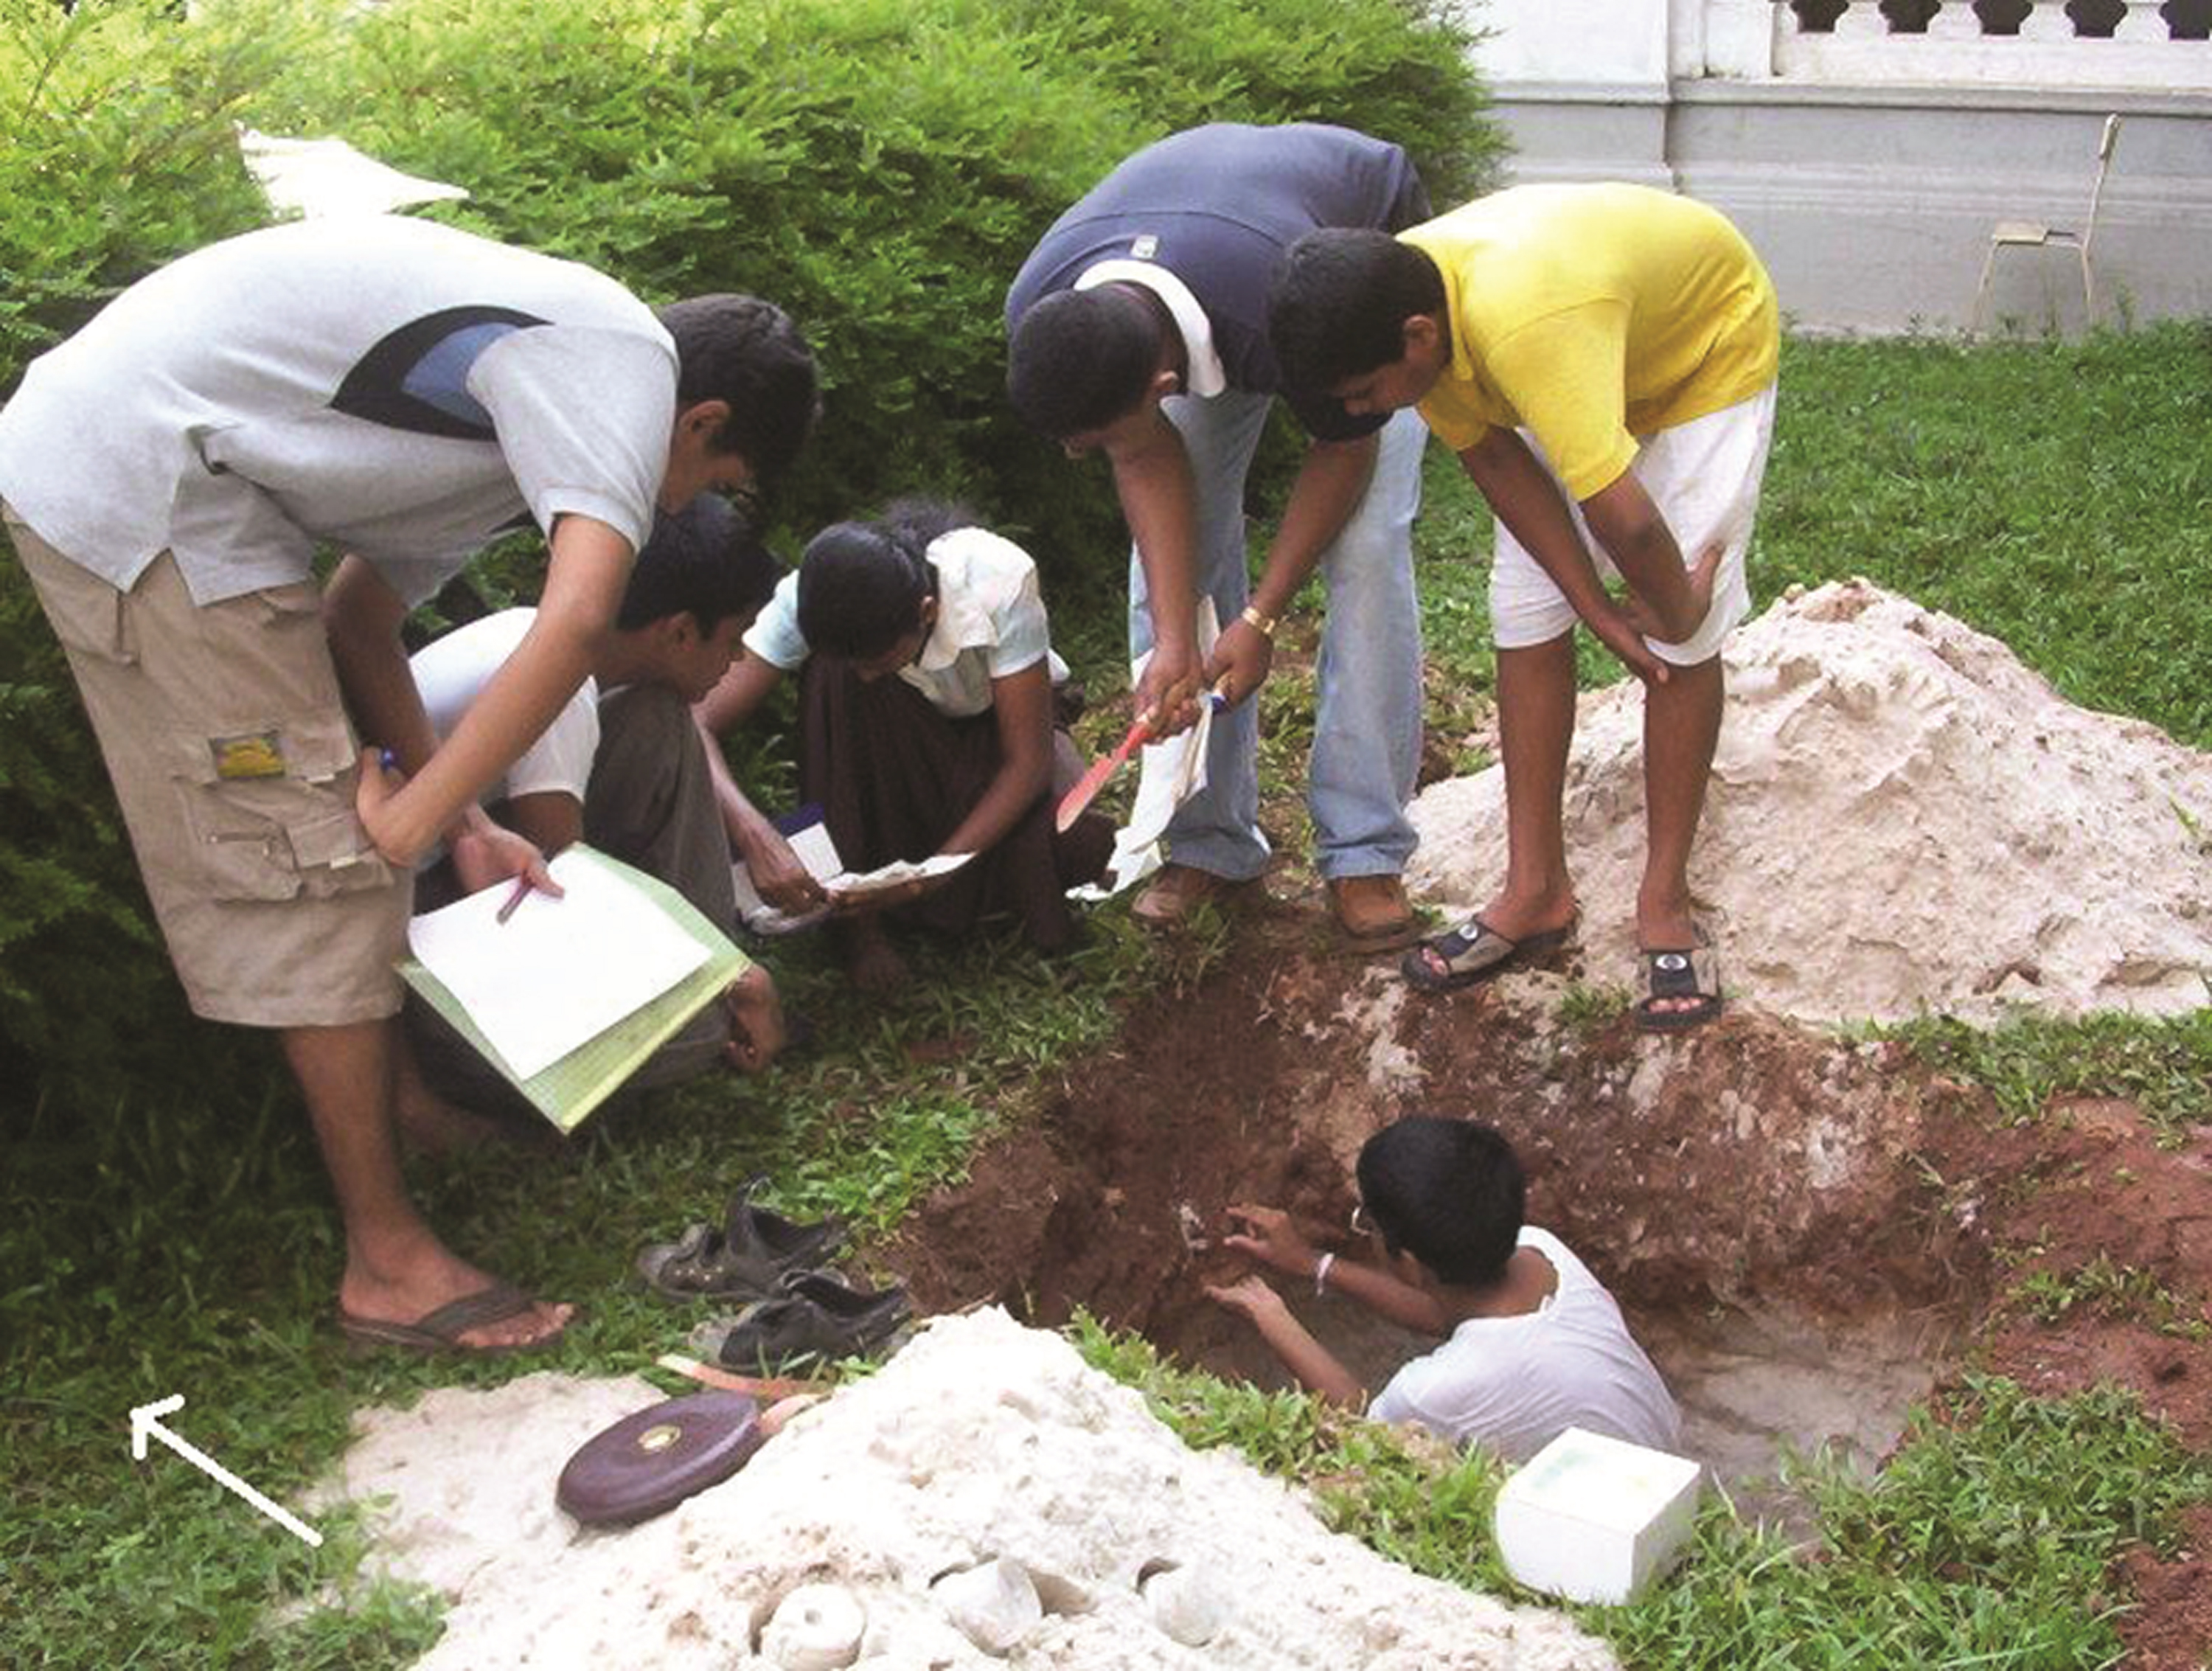 Students standing around a hole, holding science equipment and papers, as one student digs in the hole.